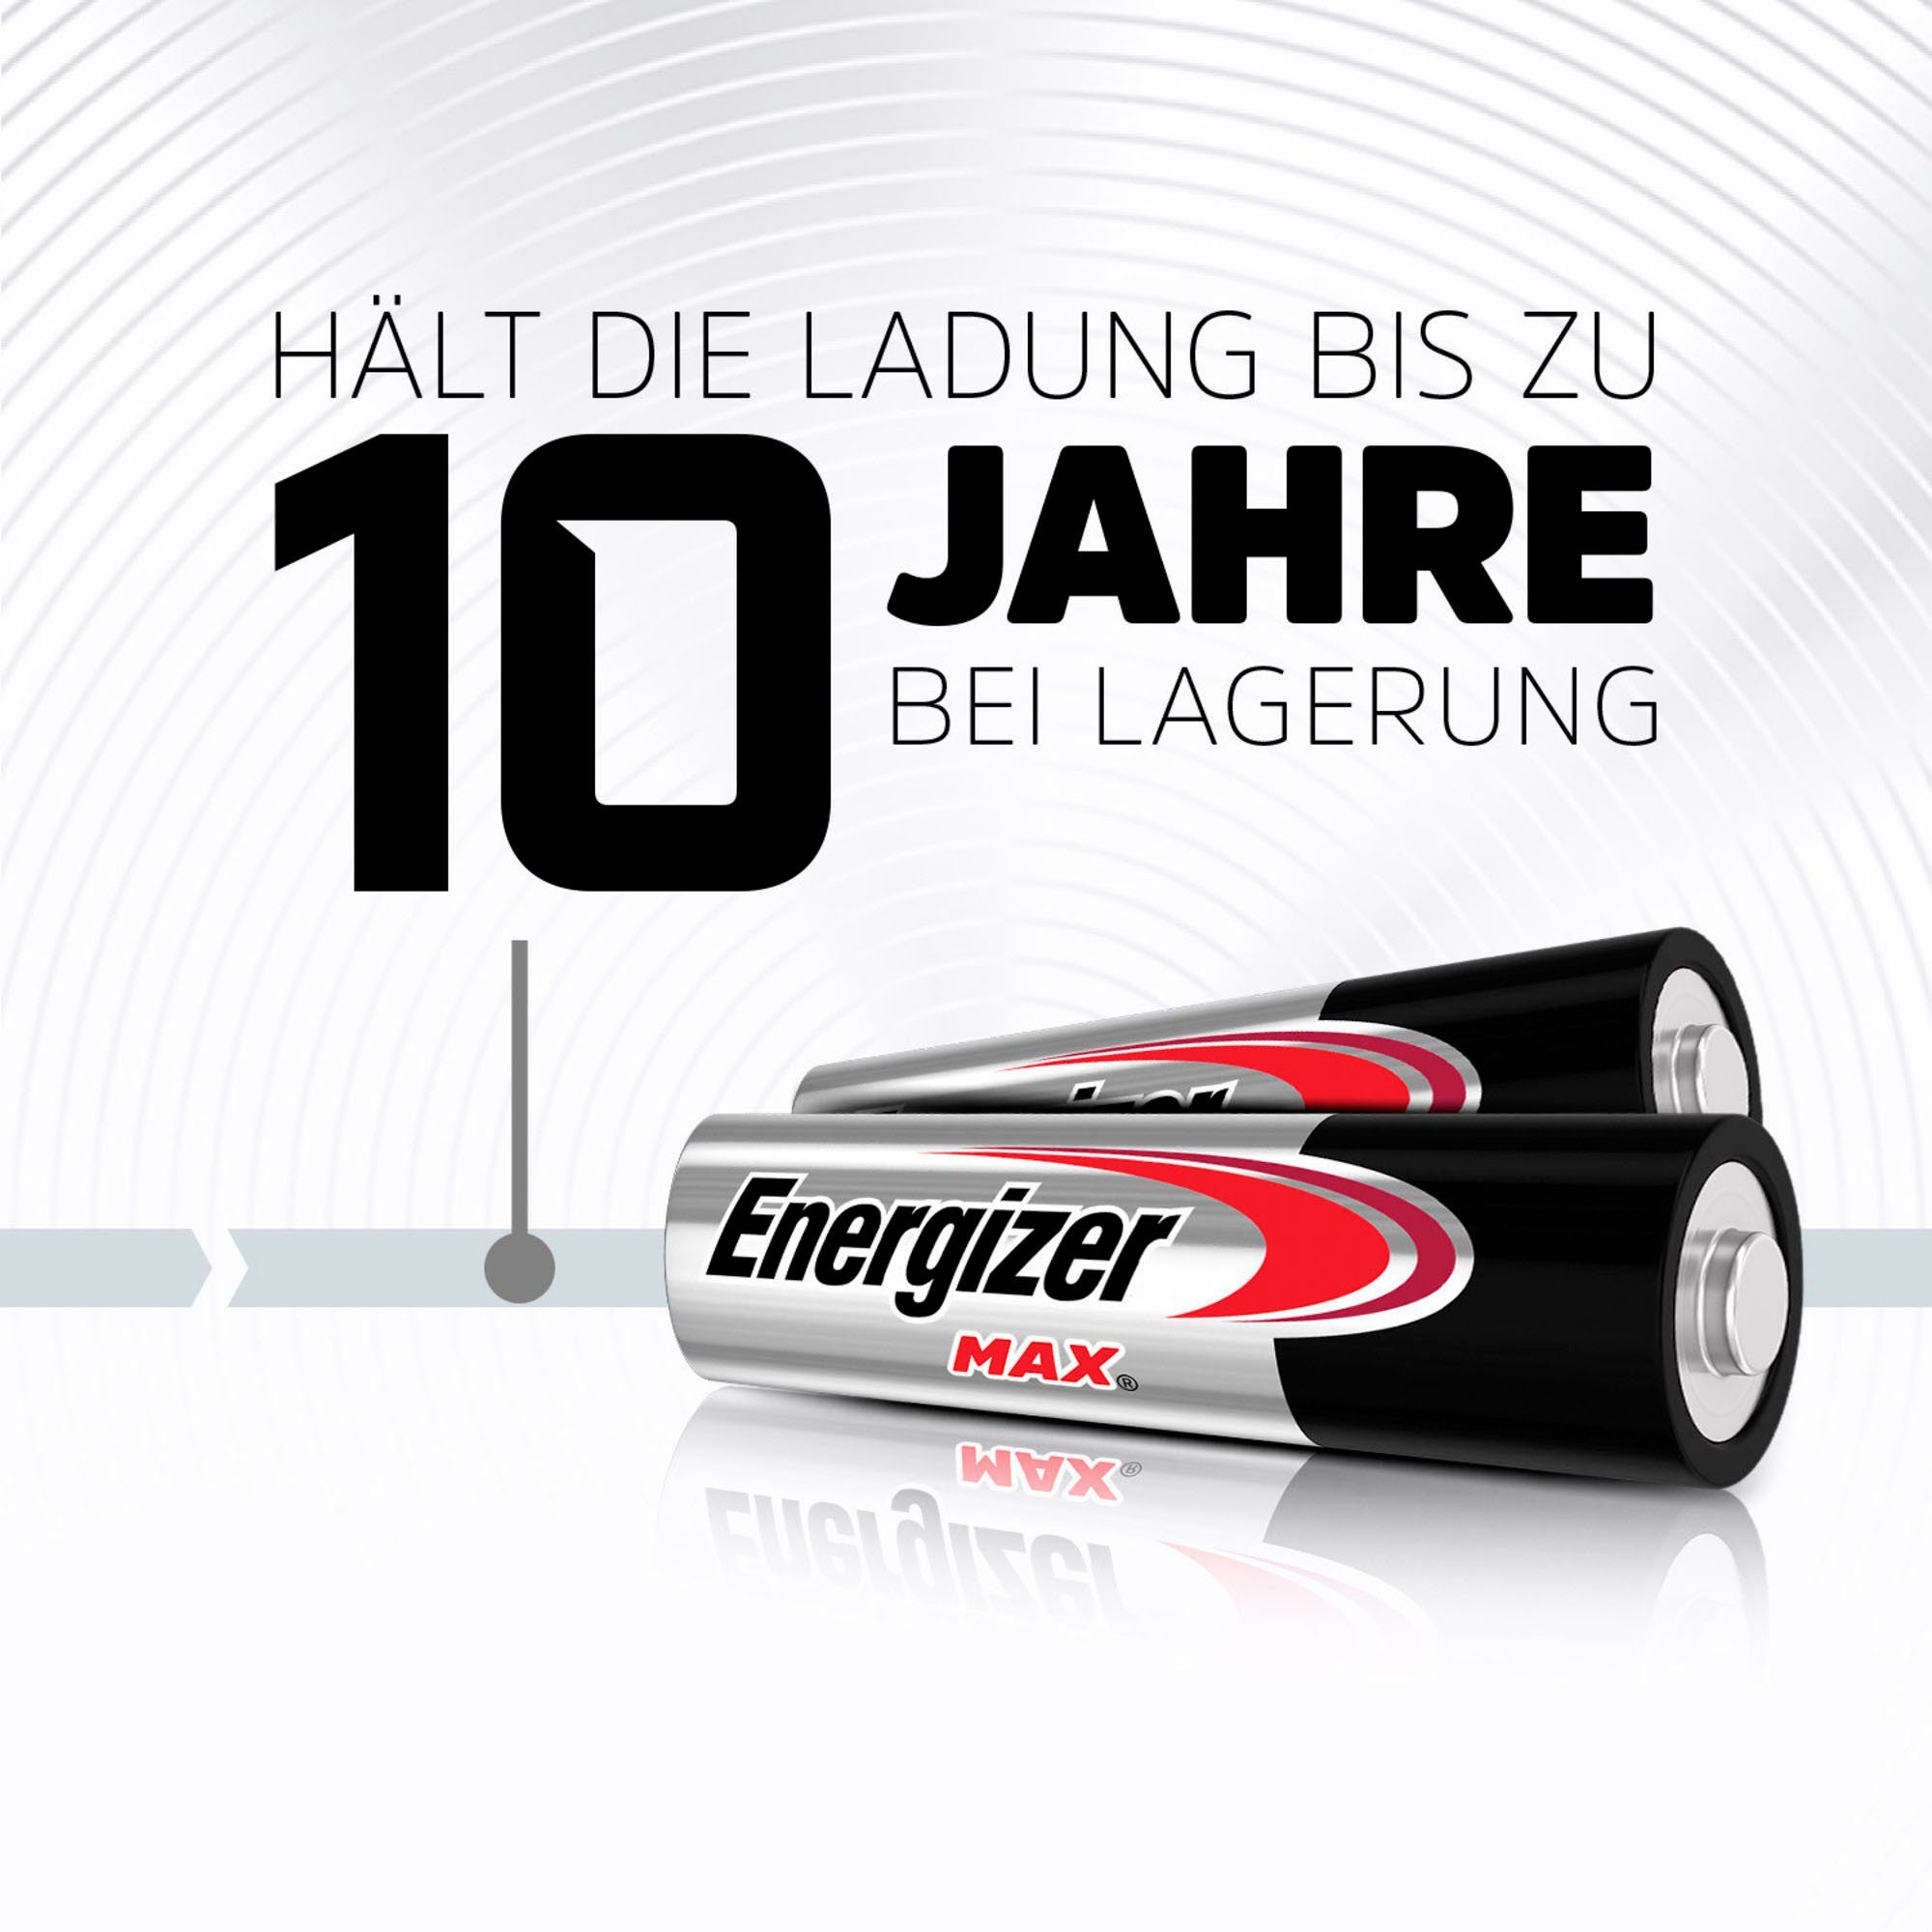 (32 Promotionware Batterie, Stück (AAA) 24+8 St) Micro Energizer LR03 Max